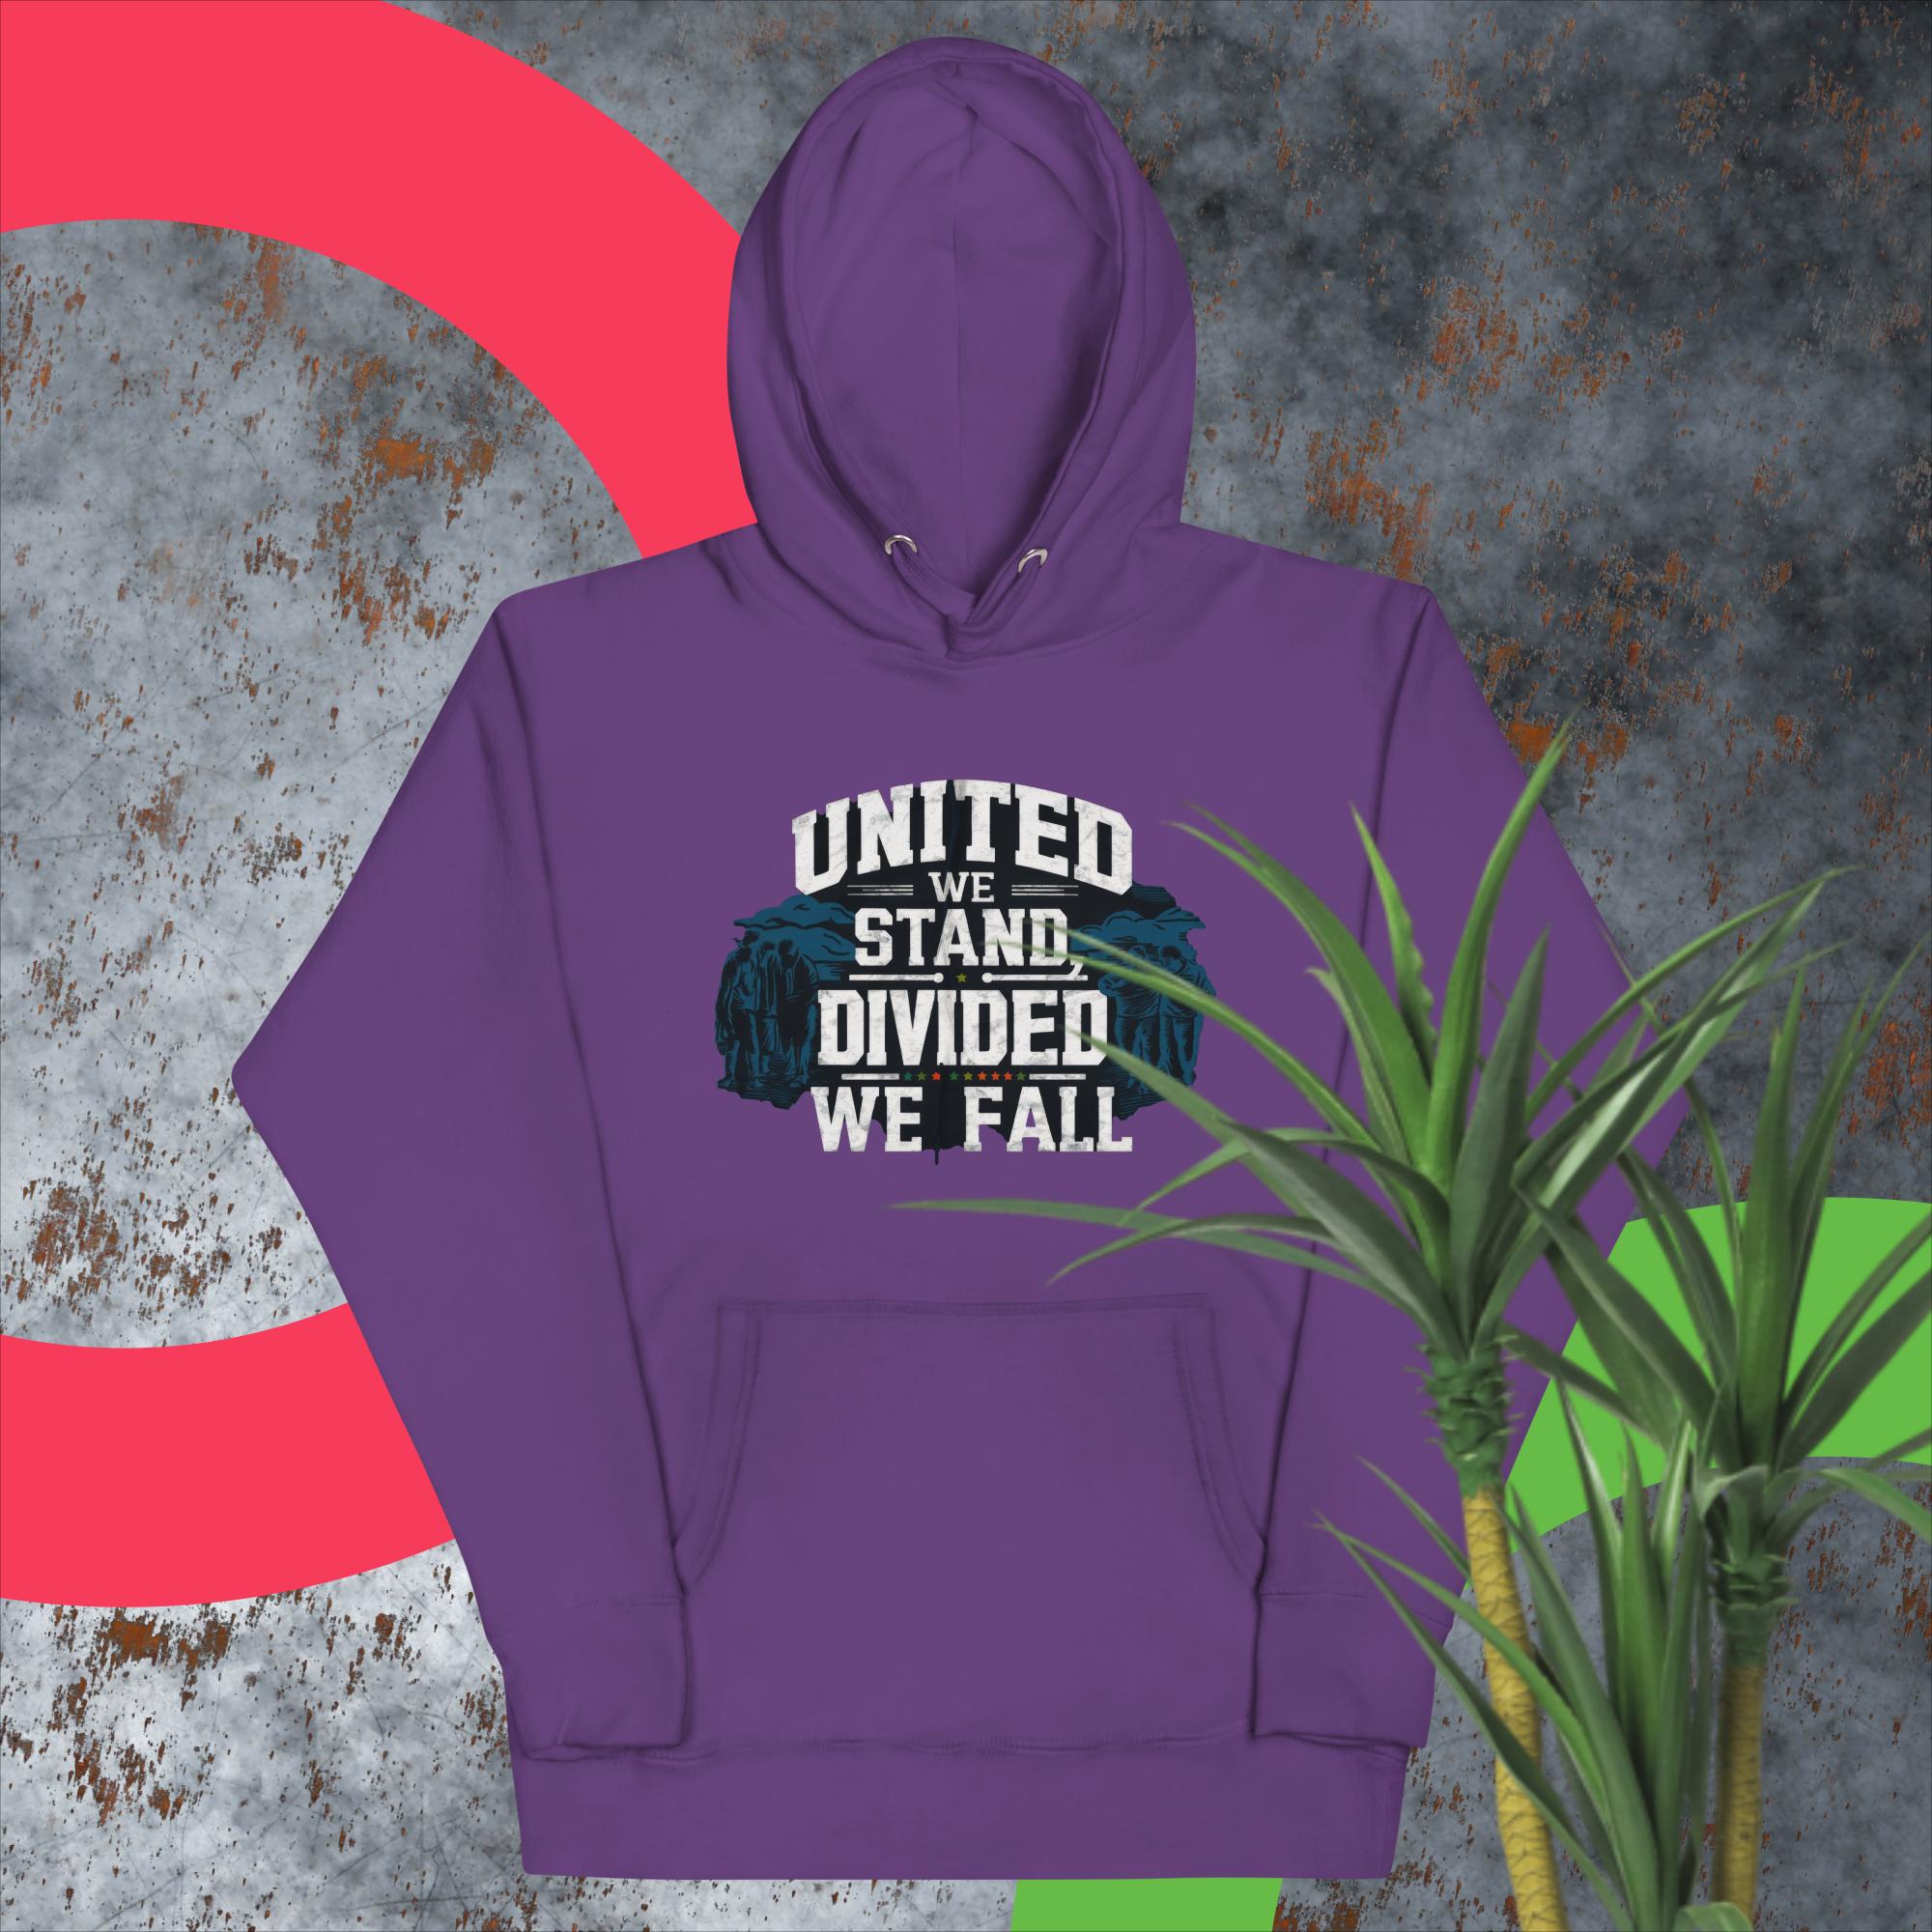 United We Stand, Divided We Fall - Unisex Hoodie